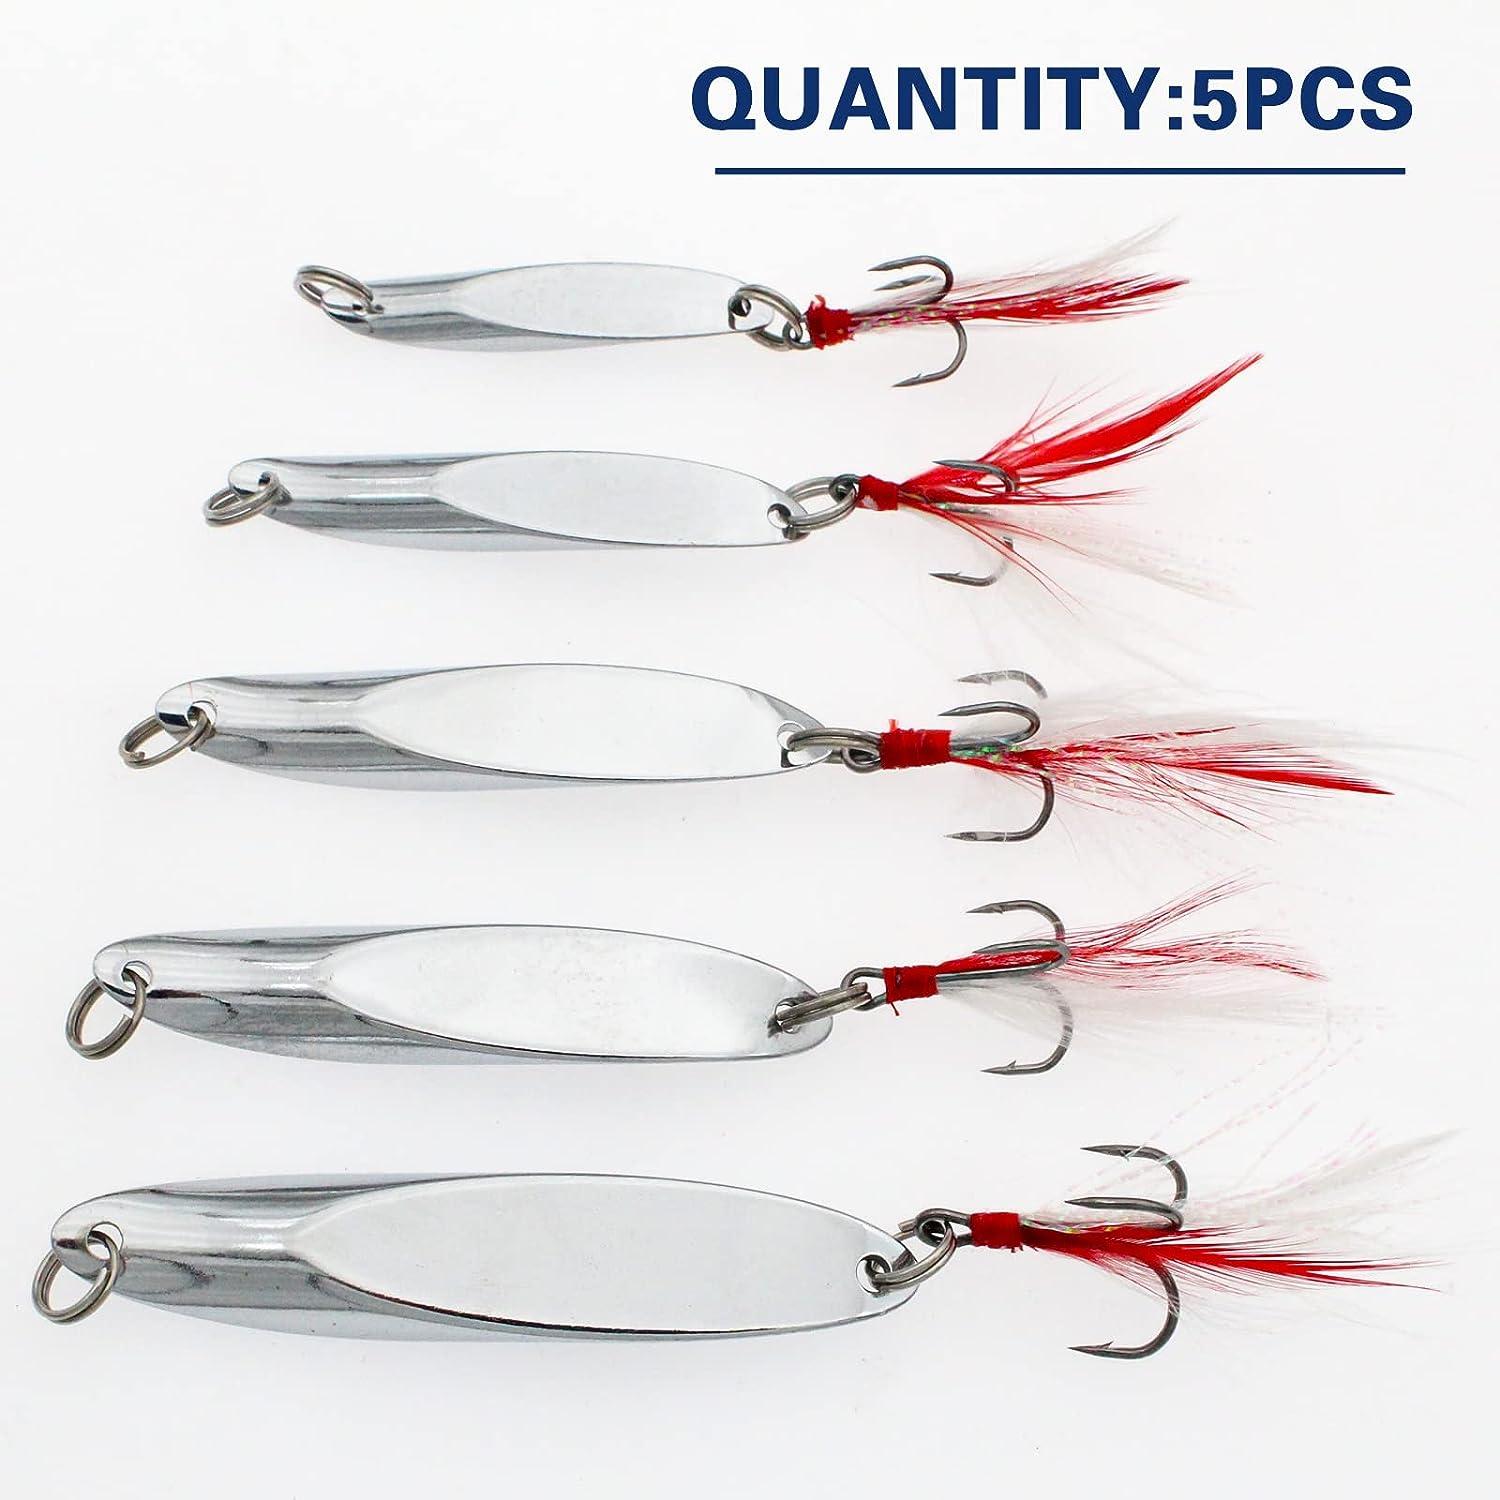 Cheap 5Pcs Spoon Fishing Lure Spinnerbaits with Plastic Box